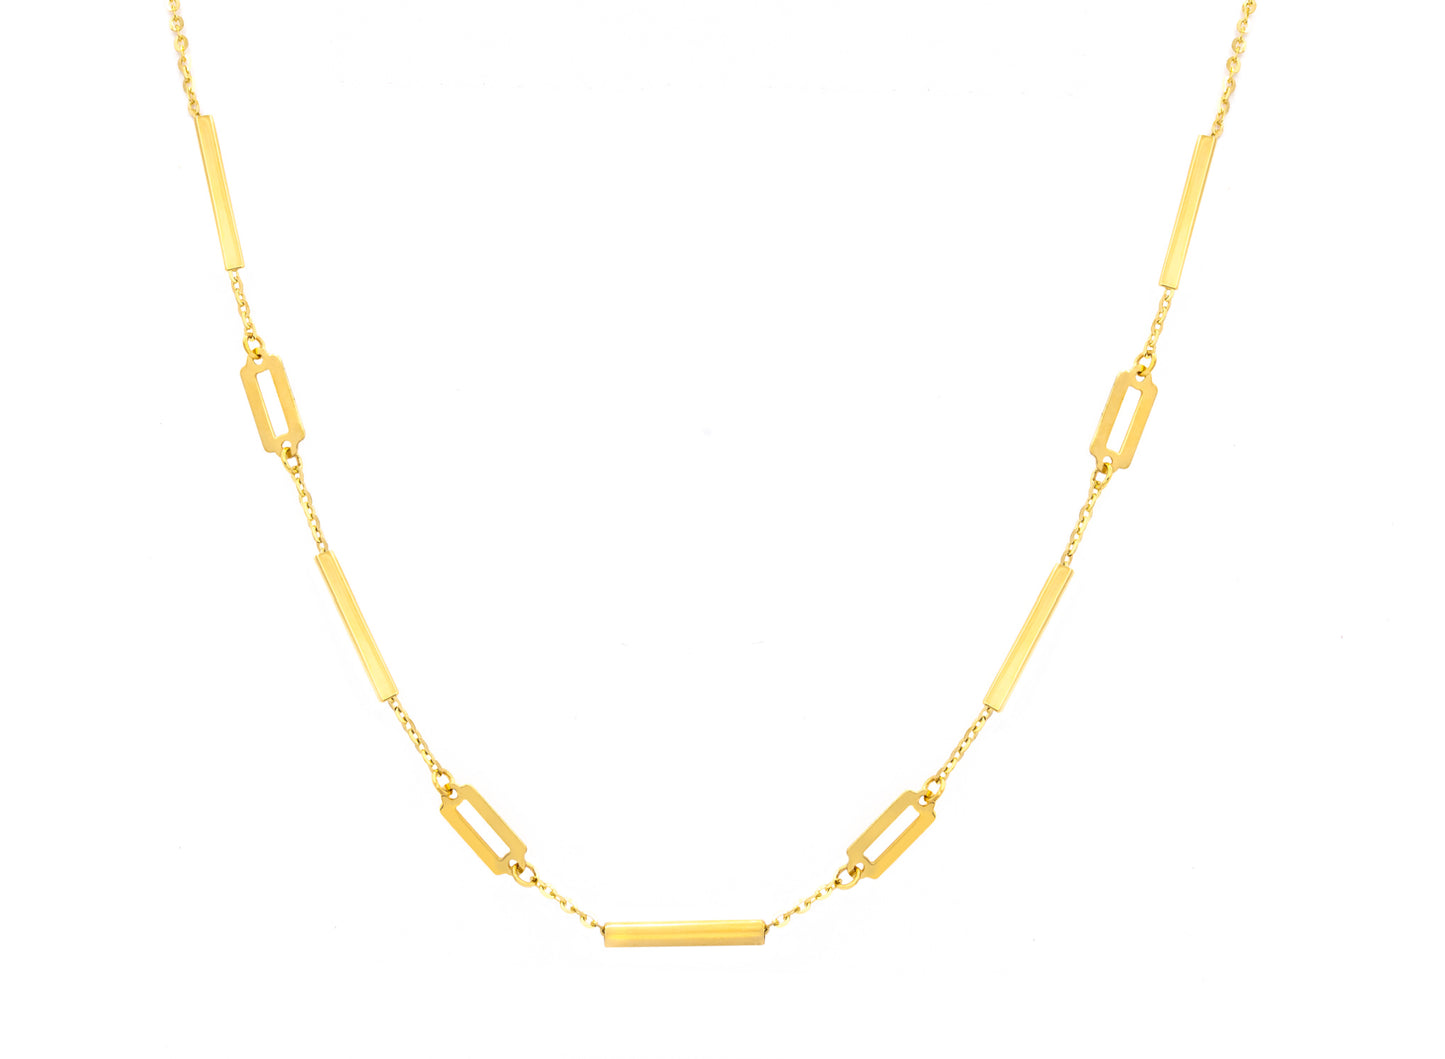 Bar and Link Chain Necklace crafted in 14 Karat Gold